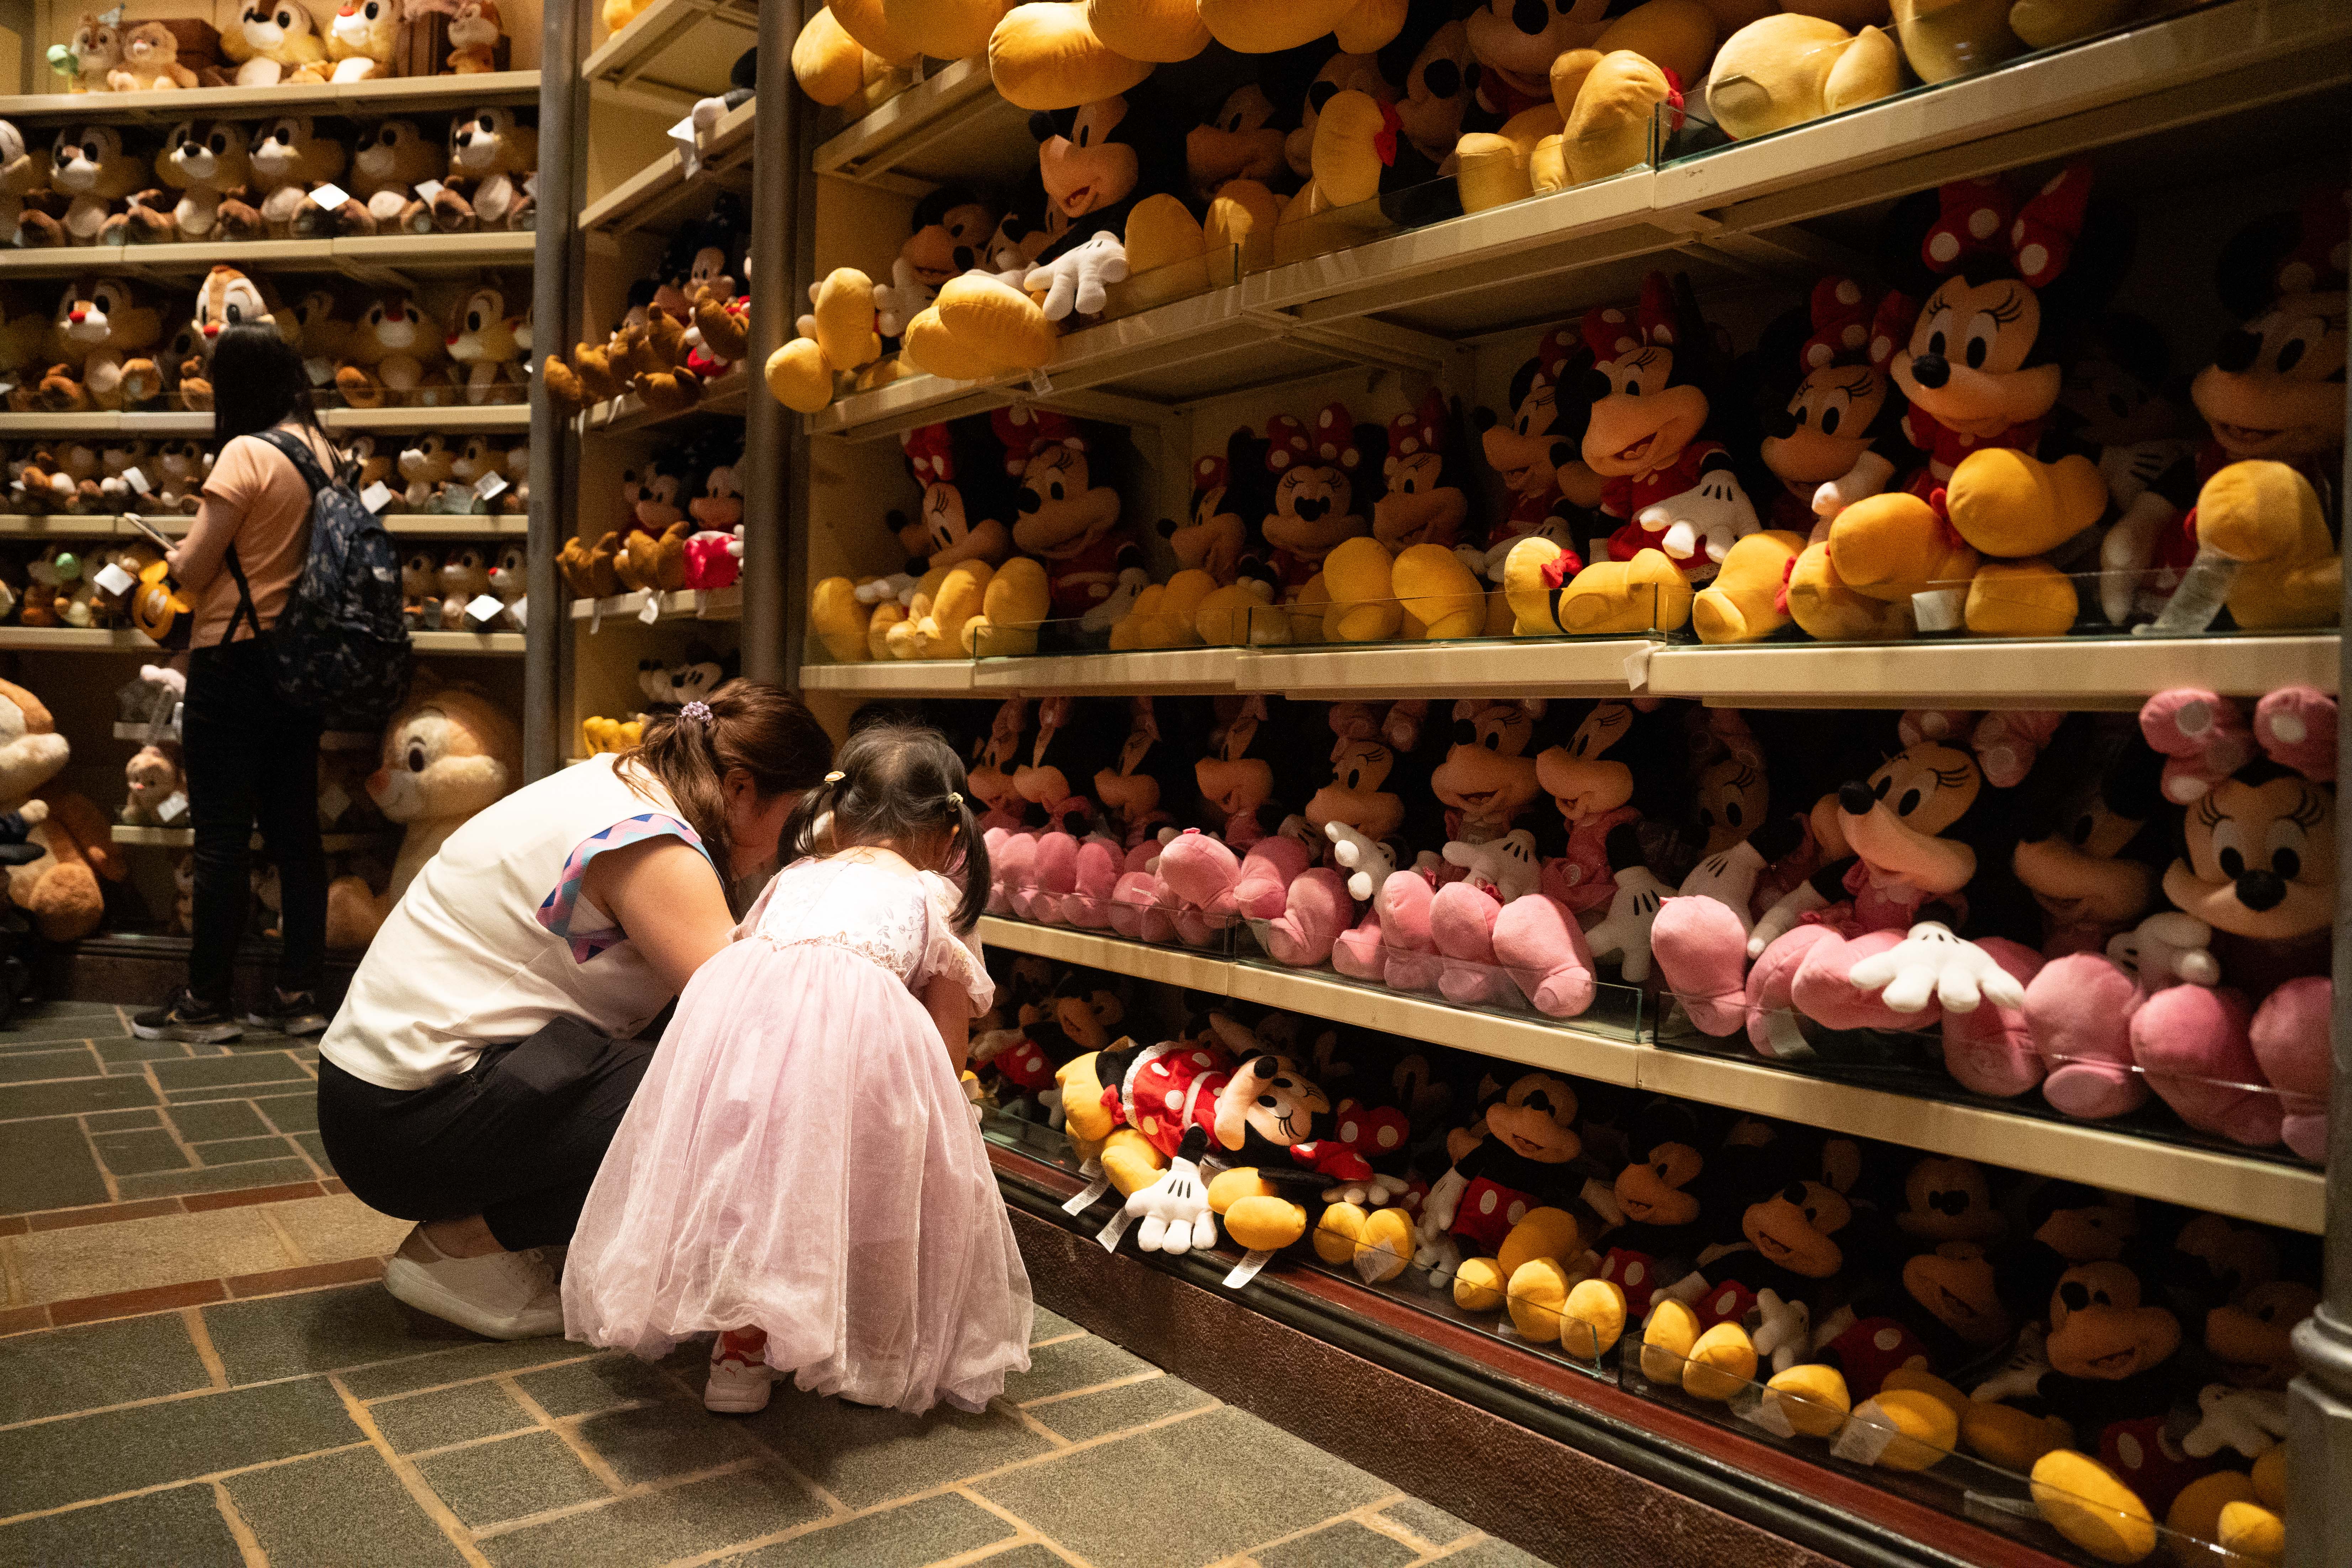 A girl and an older woman at Disney shop with stuffed toys | Source: Getty Images